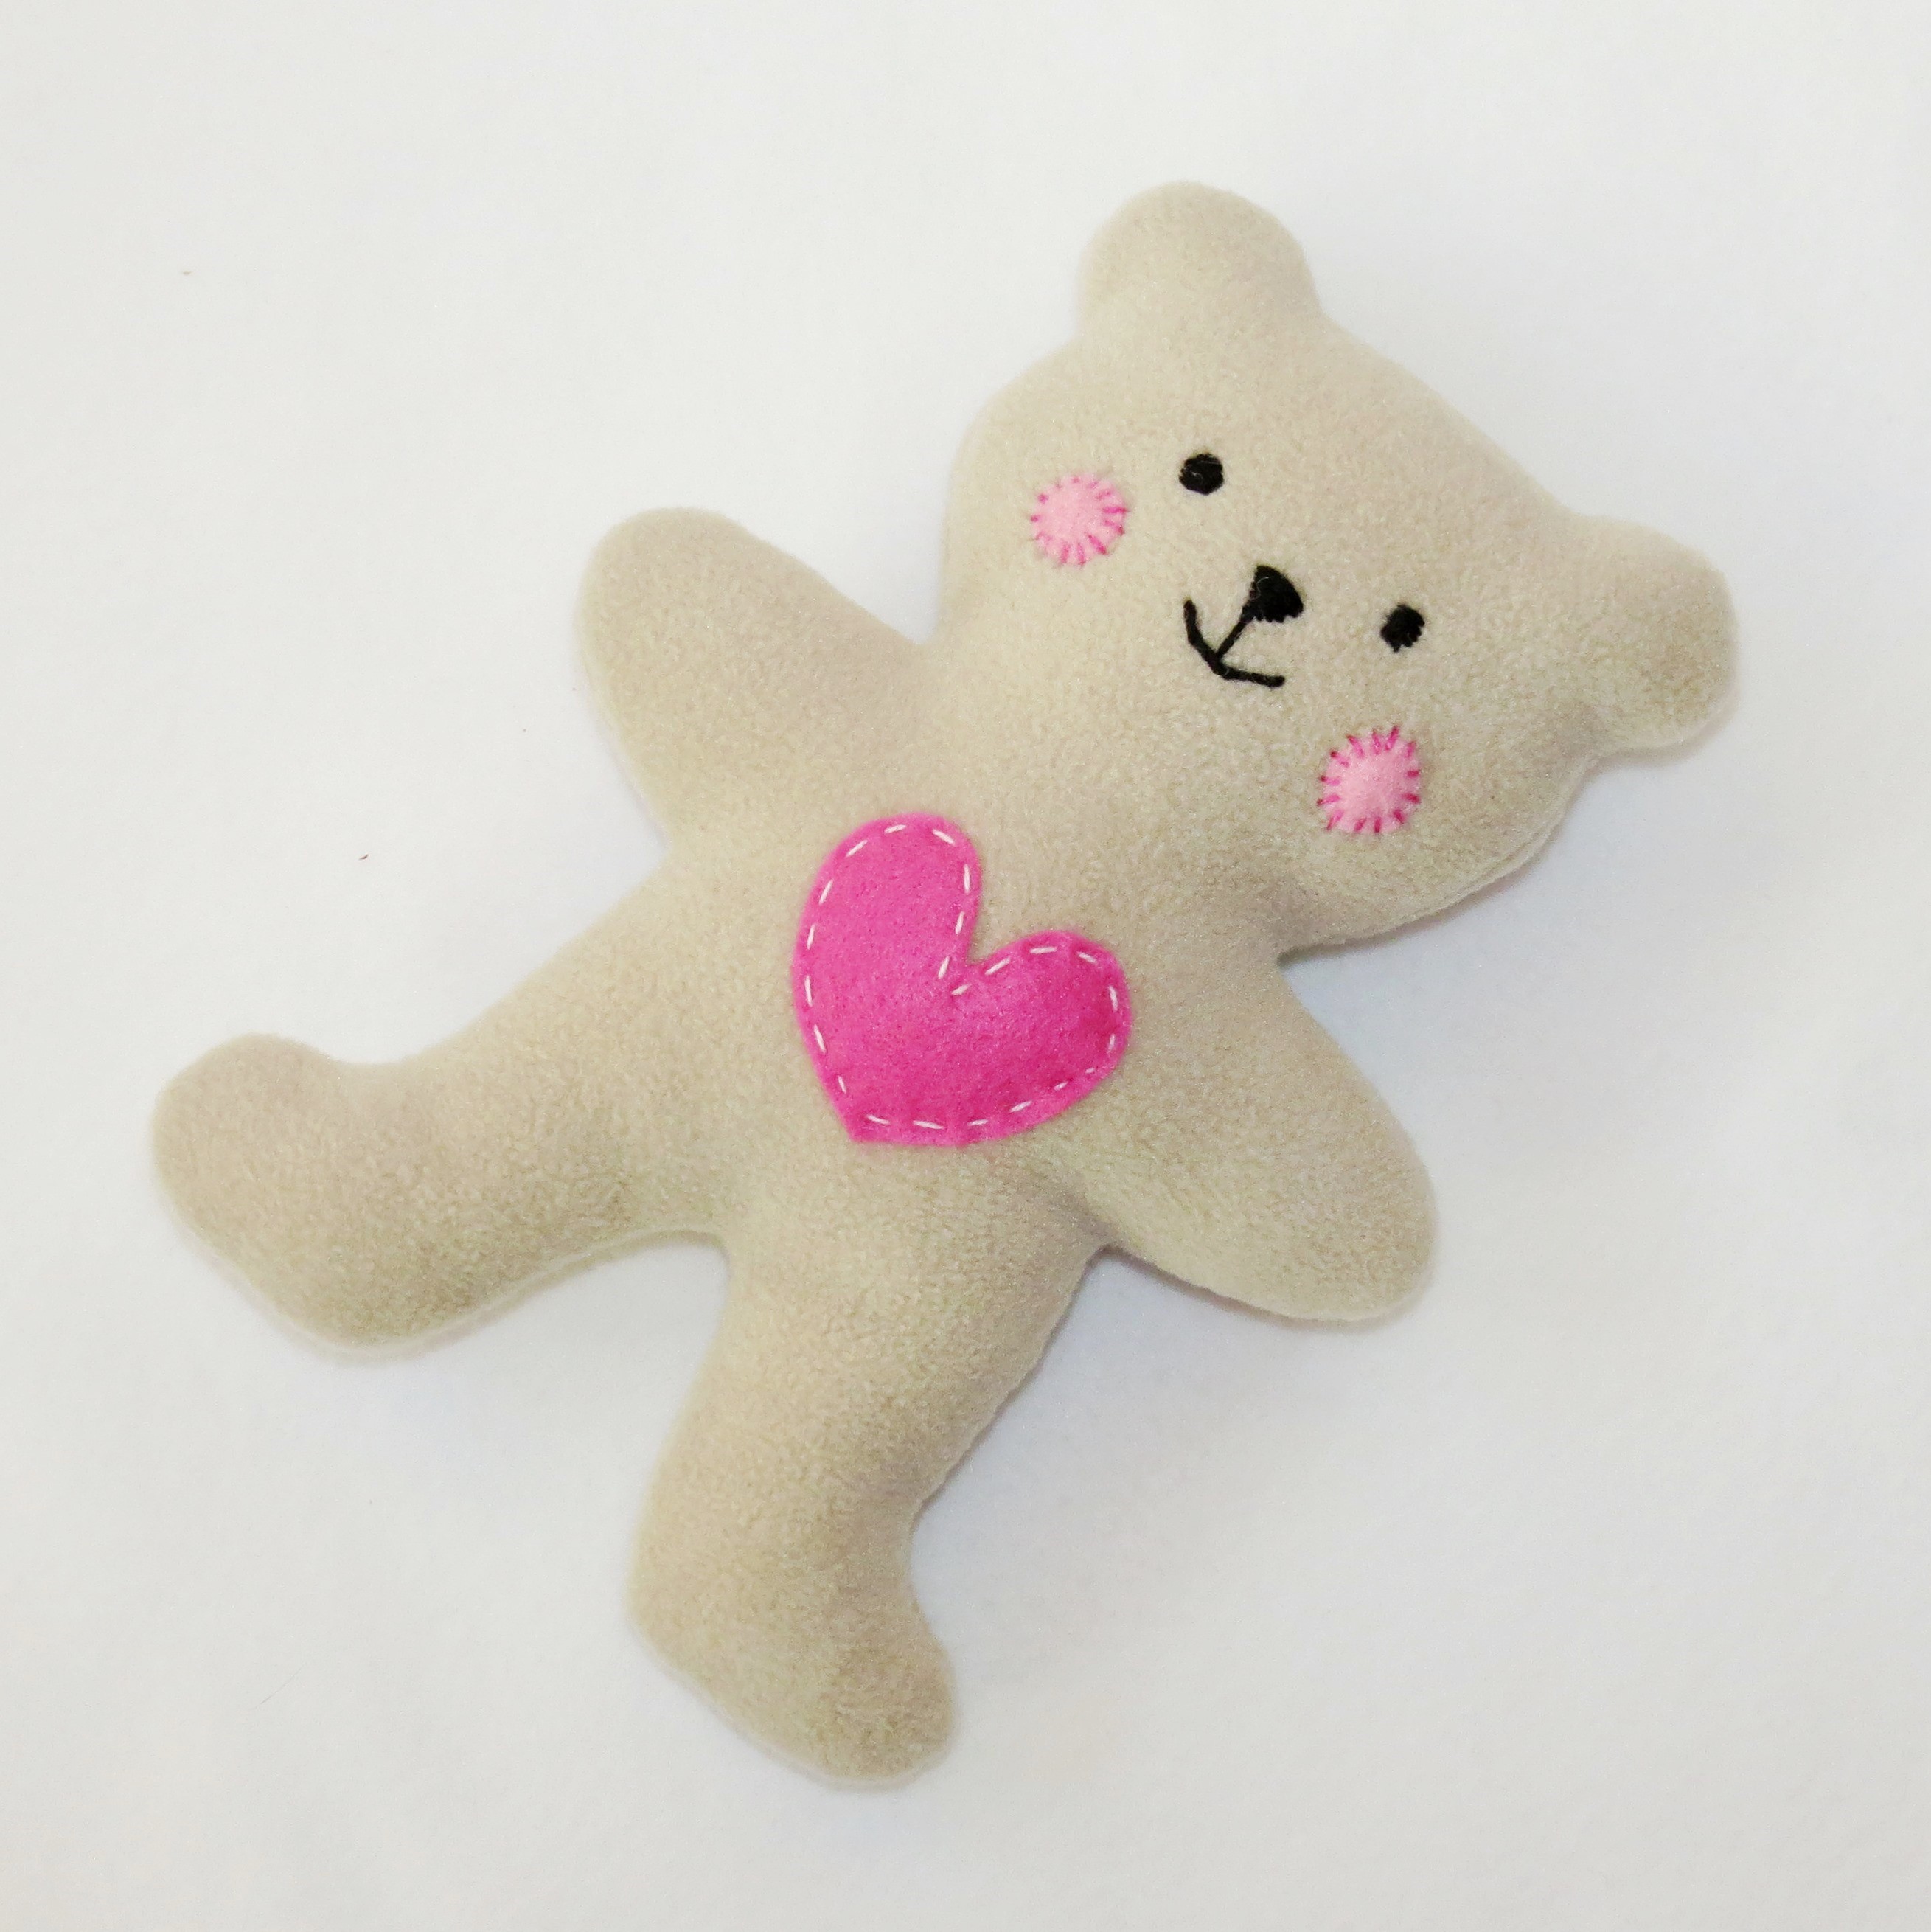 What are some free, easy teddy bear patterns?